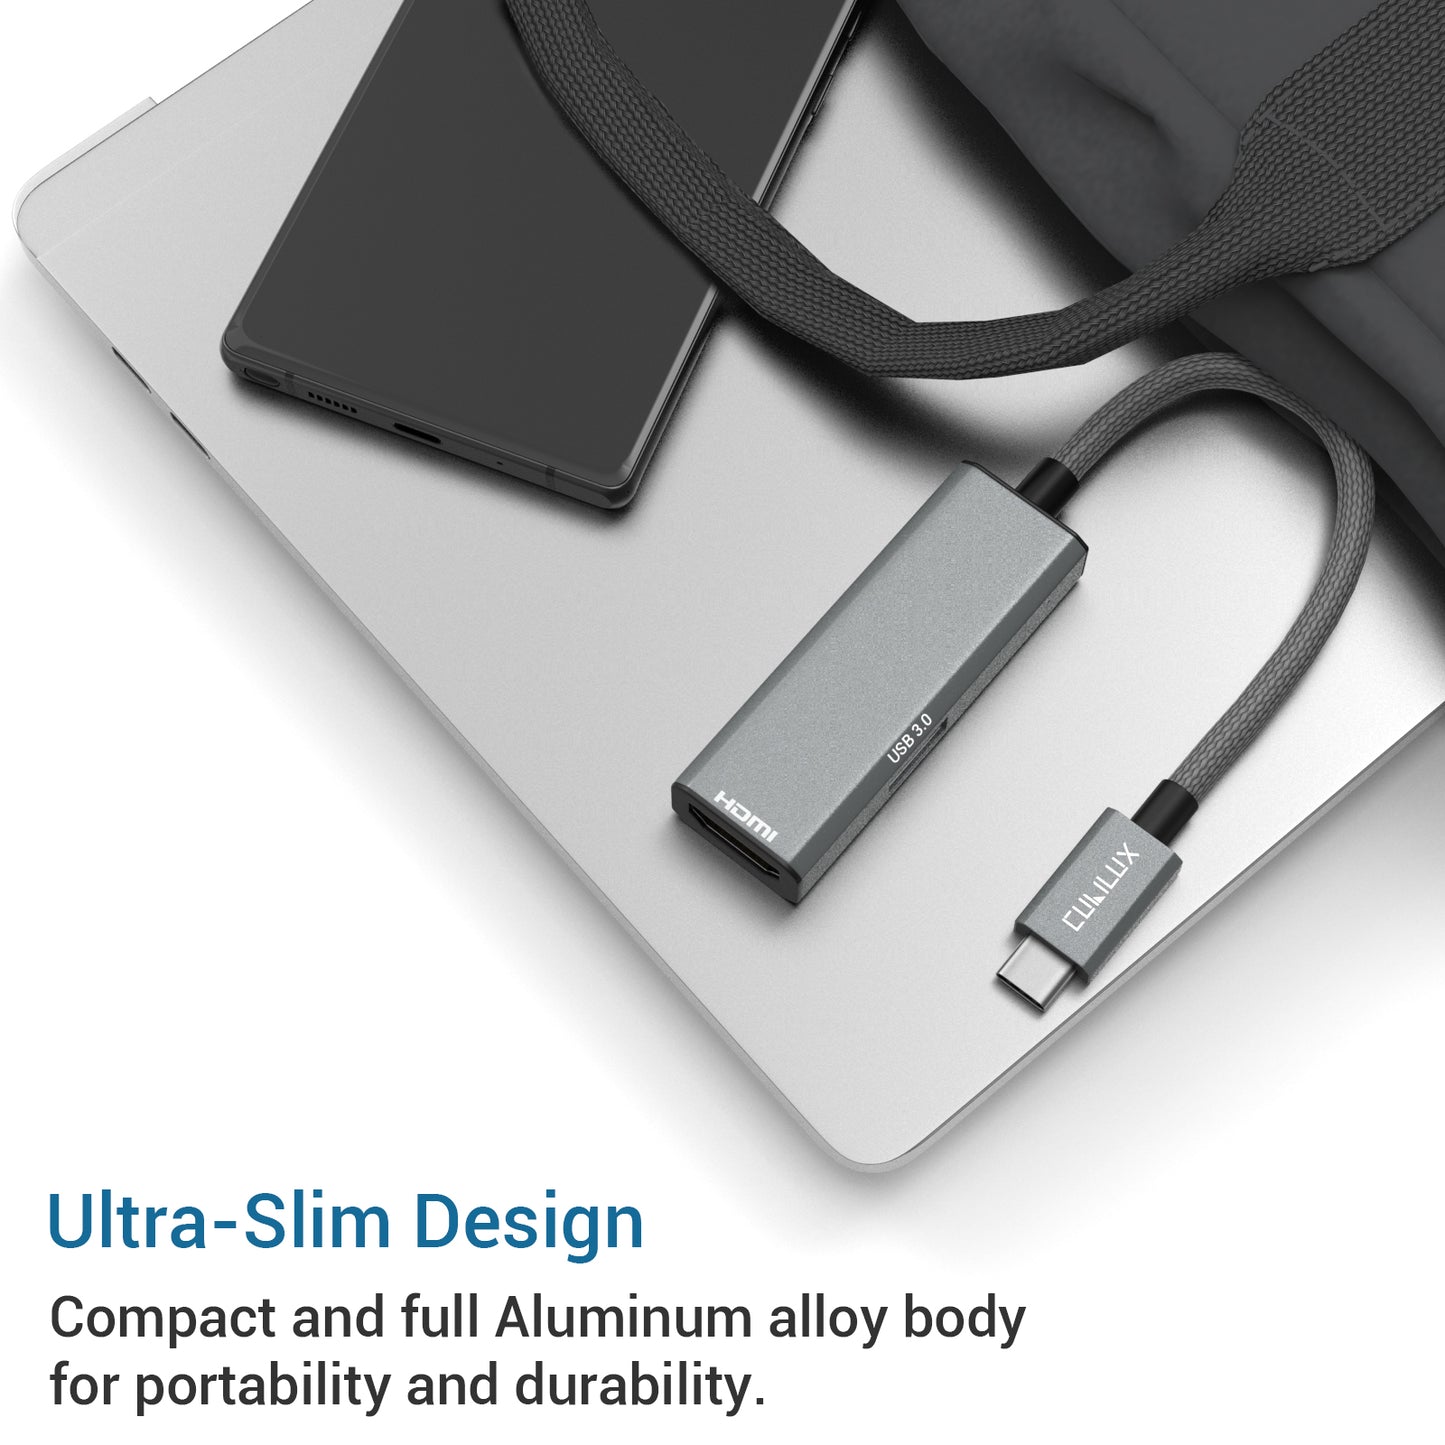 2-In-1 USB C to 4K HDMI Adapter with USB 3.0